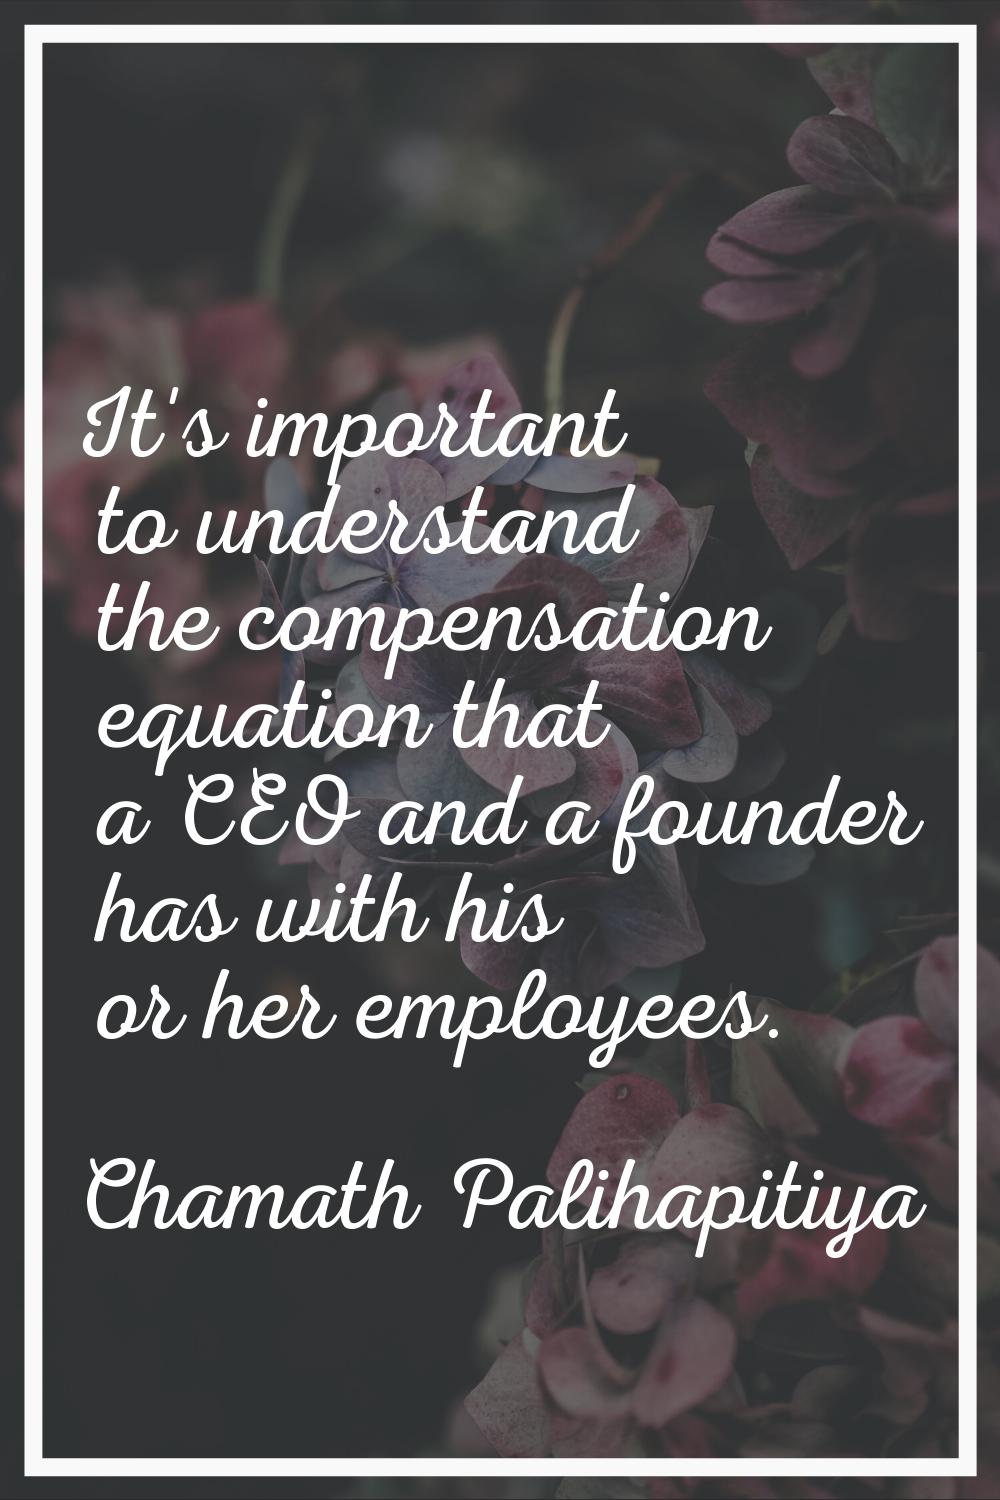 It's important to understand the compensation equation that a CEO and a founder has with his or her